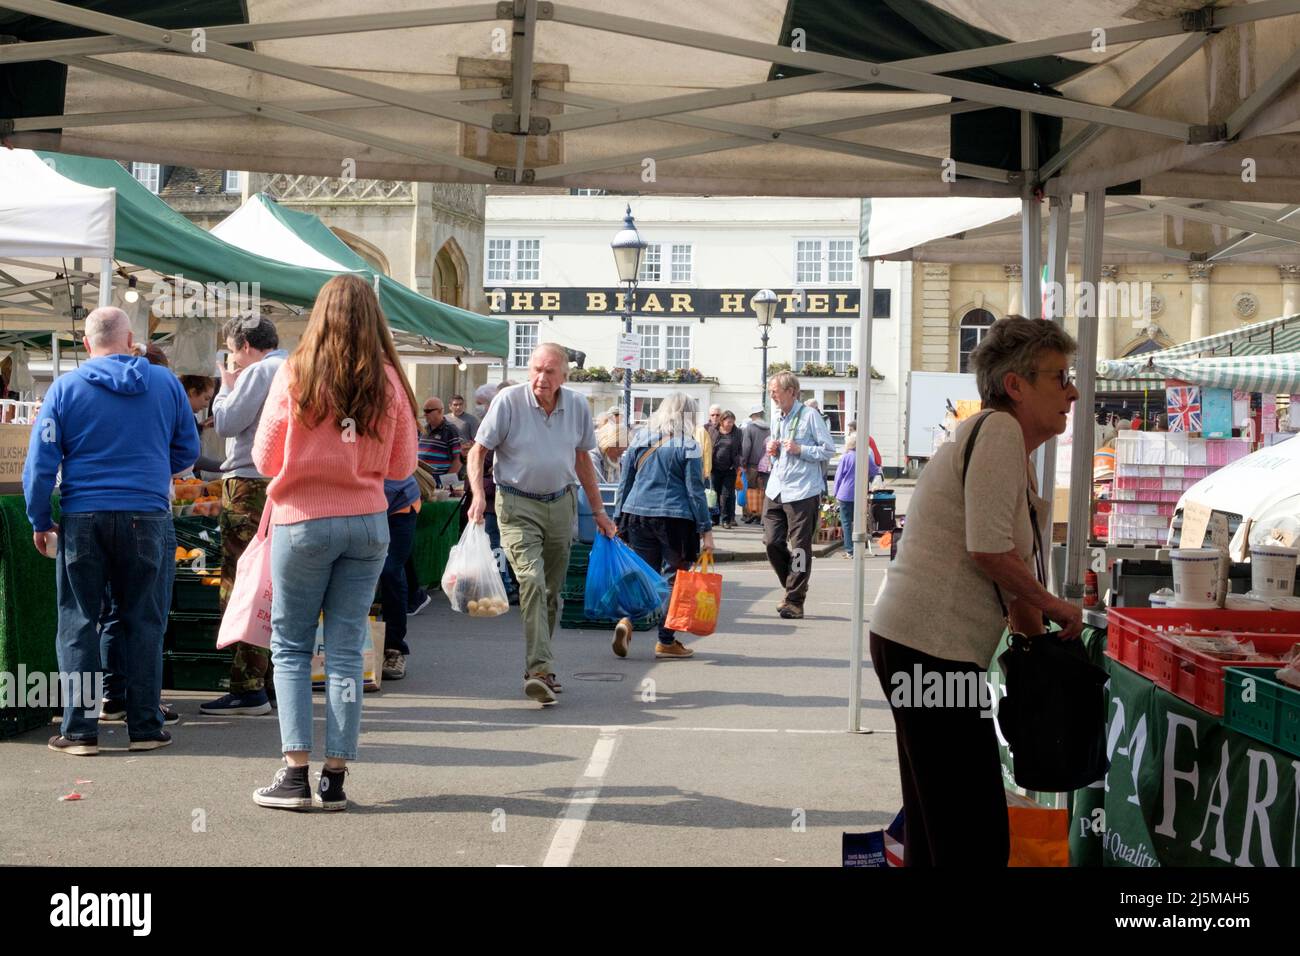 Devizes is a wiltshire Market Town. A busy Market is held on thuirsday, Bear Hotel in the backgriund. Stock Photo